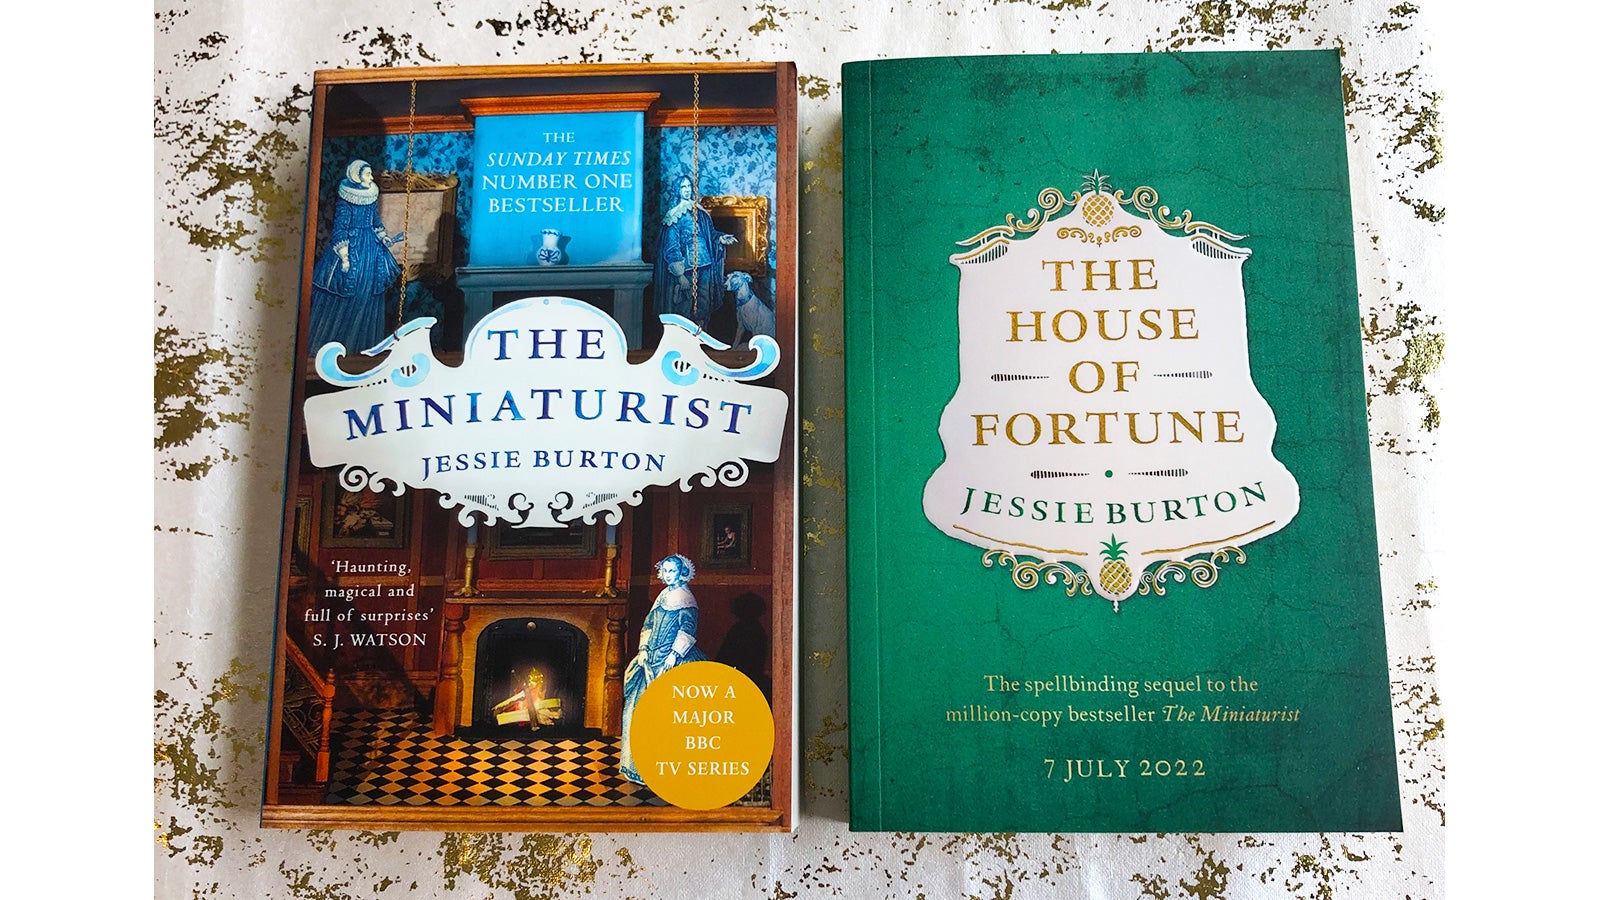 A copy of The Miniaturist next to a proof copy of The House of Fortune on a white and gold background.